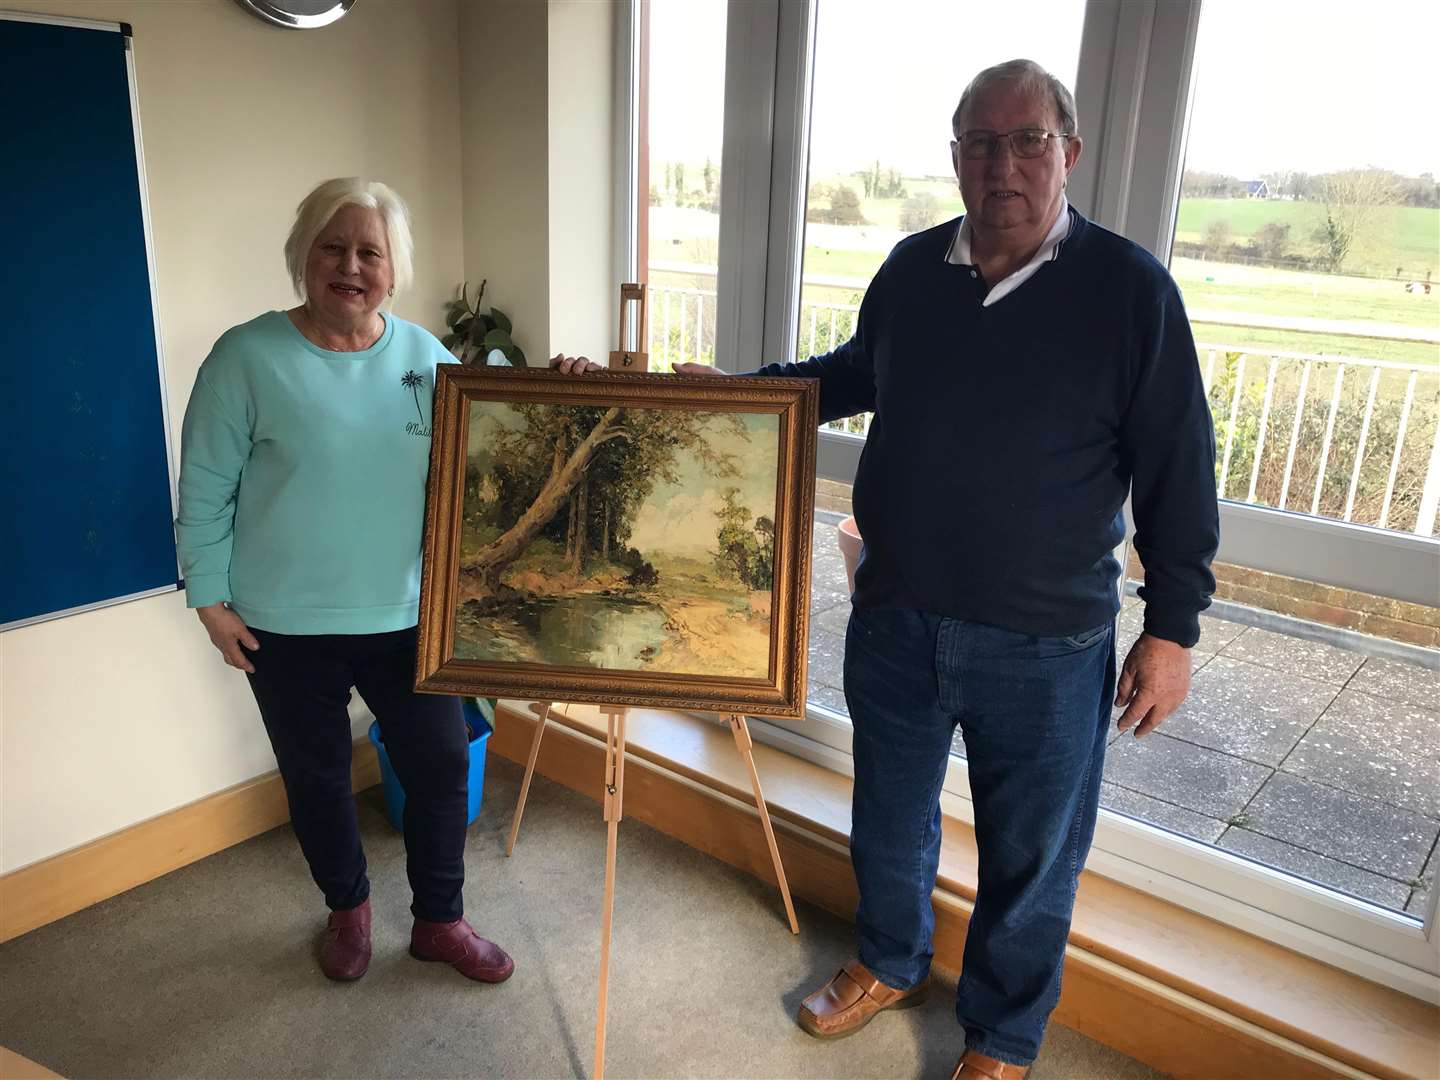 Handover of painting between Mr Razzell to Mrs Cousins (1171107)